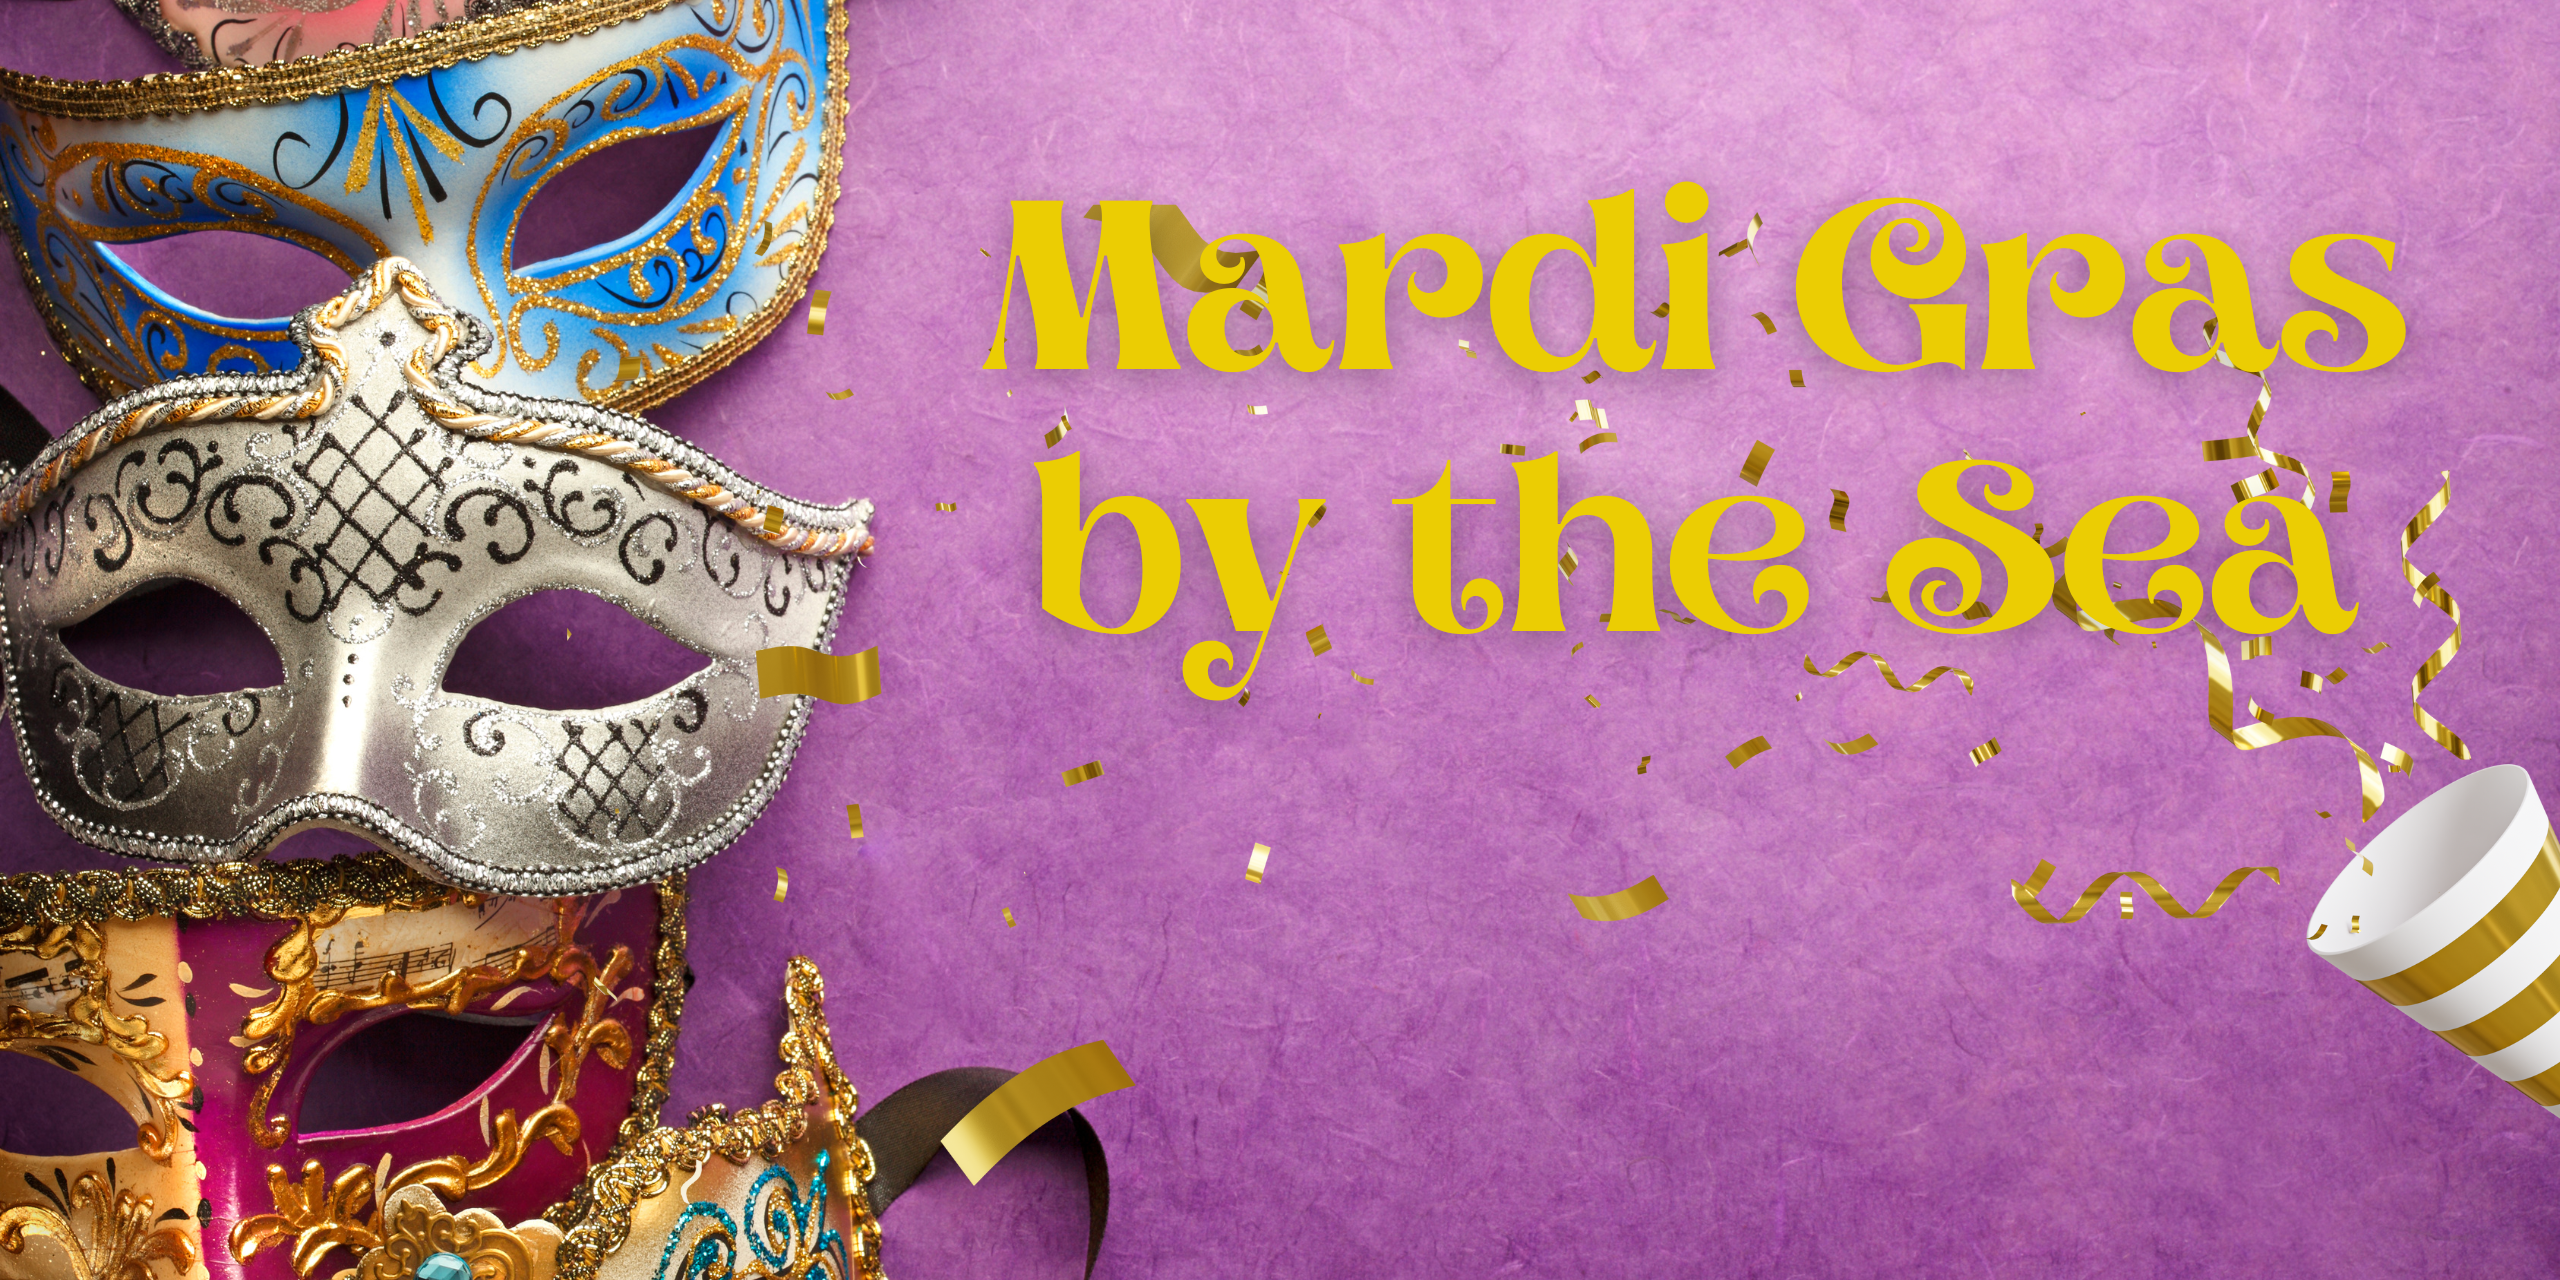 A colorful picture with mardi gras masks and the title "Madi Gras by the Sea"